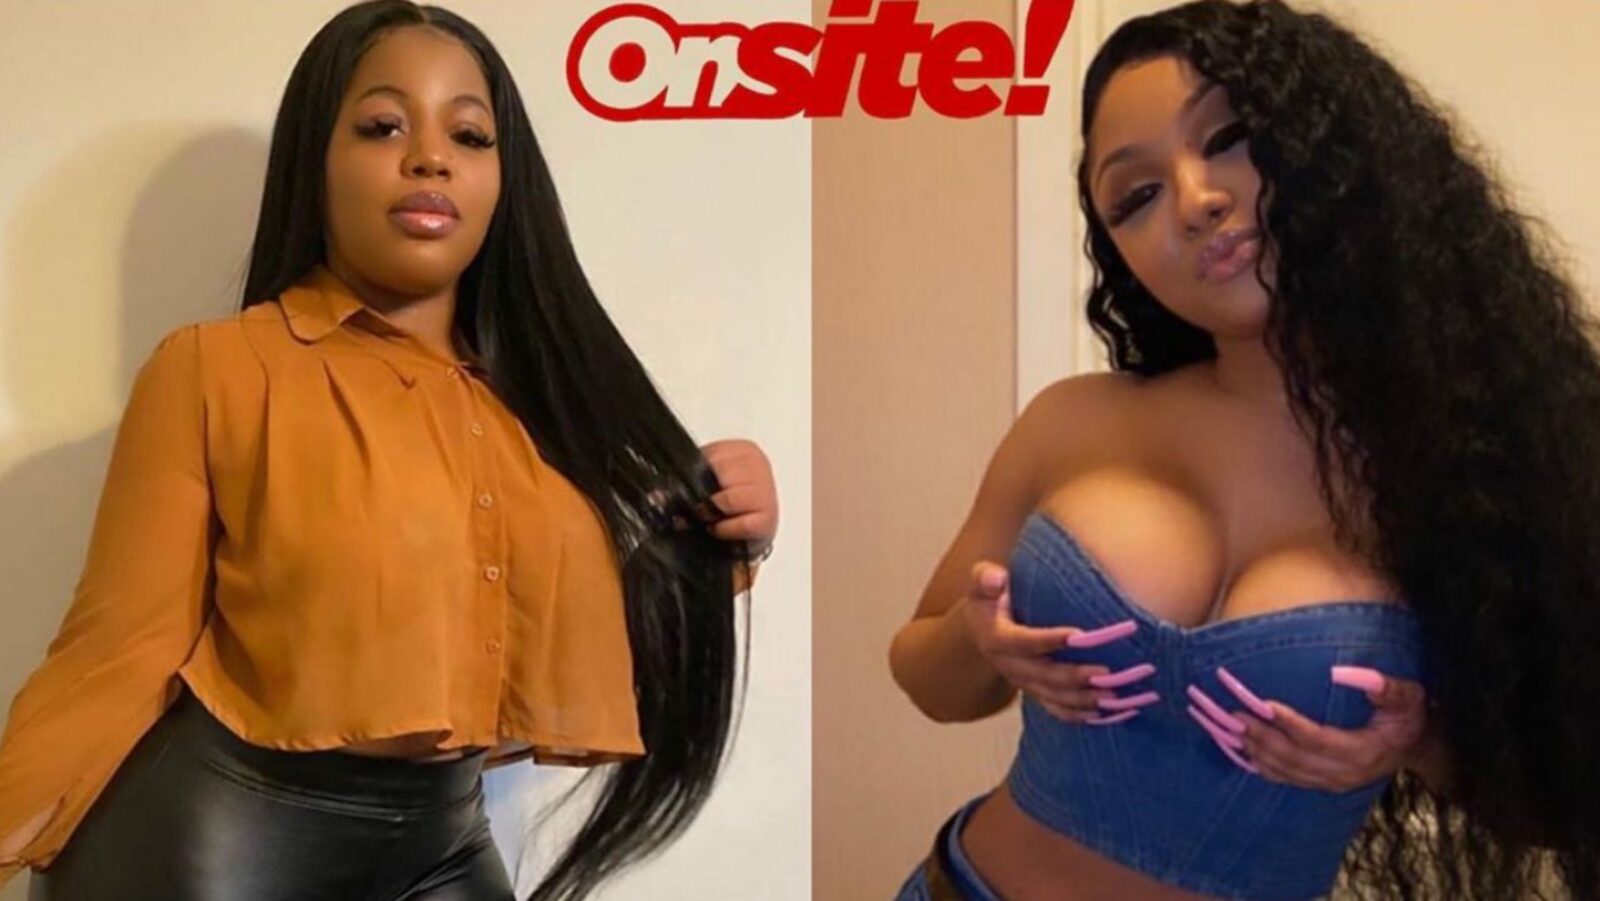  Juiccy Baby Claps Back After Ari Says She’s “Obsessed” With MoneyBaggYo